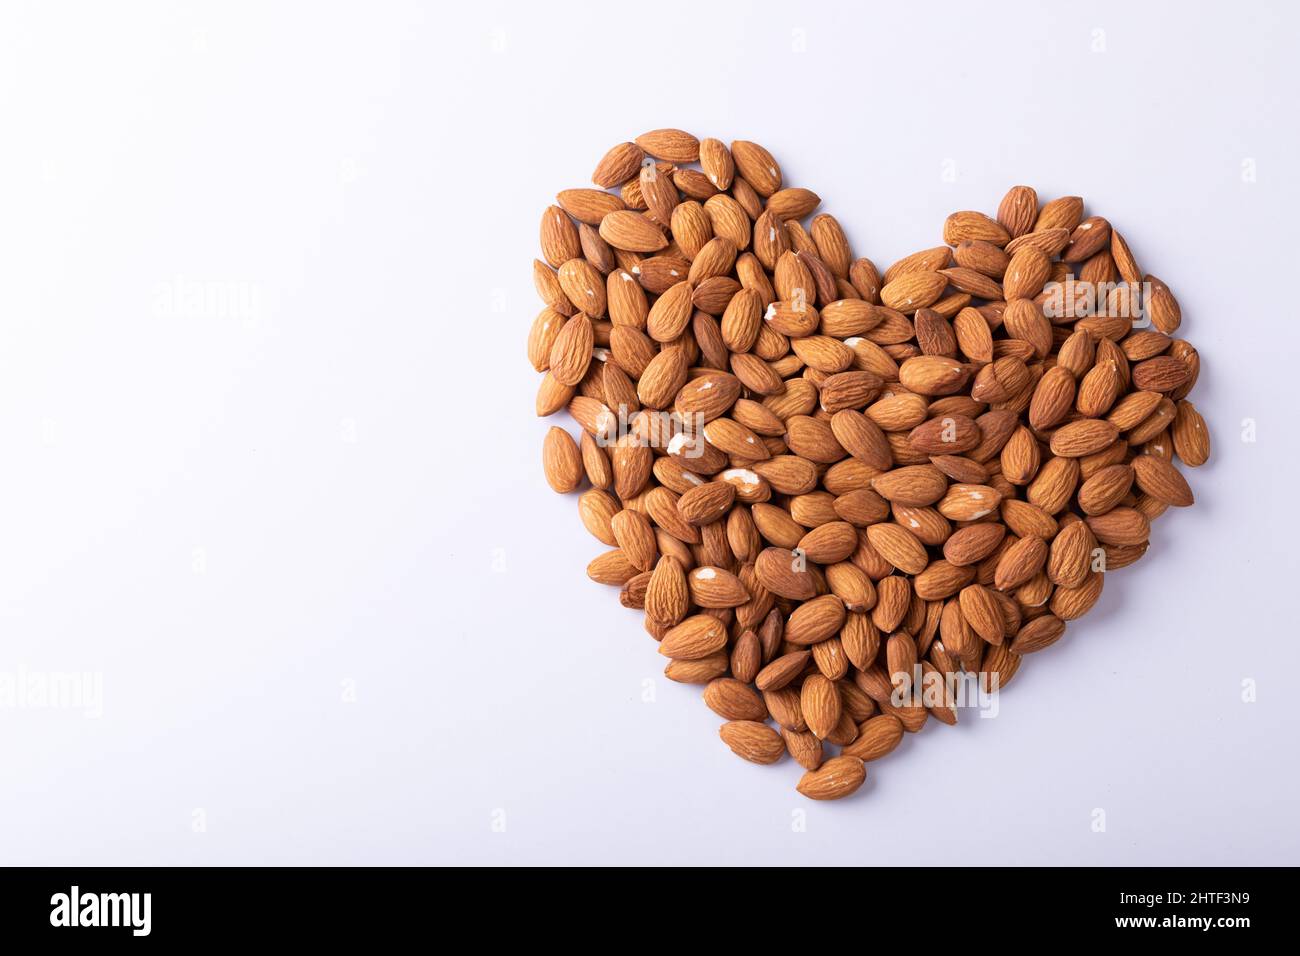 High angle close-up of almonds arranged in heart shape pattern on wooden white background Stock Photo